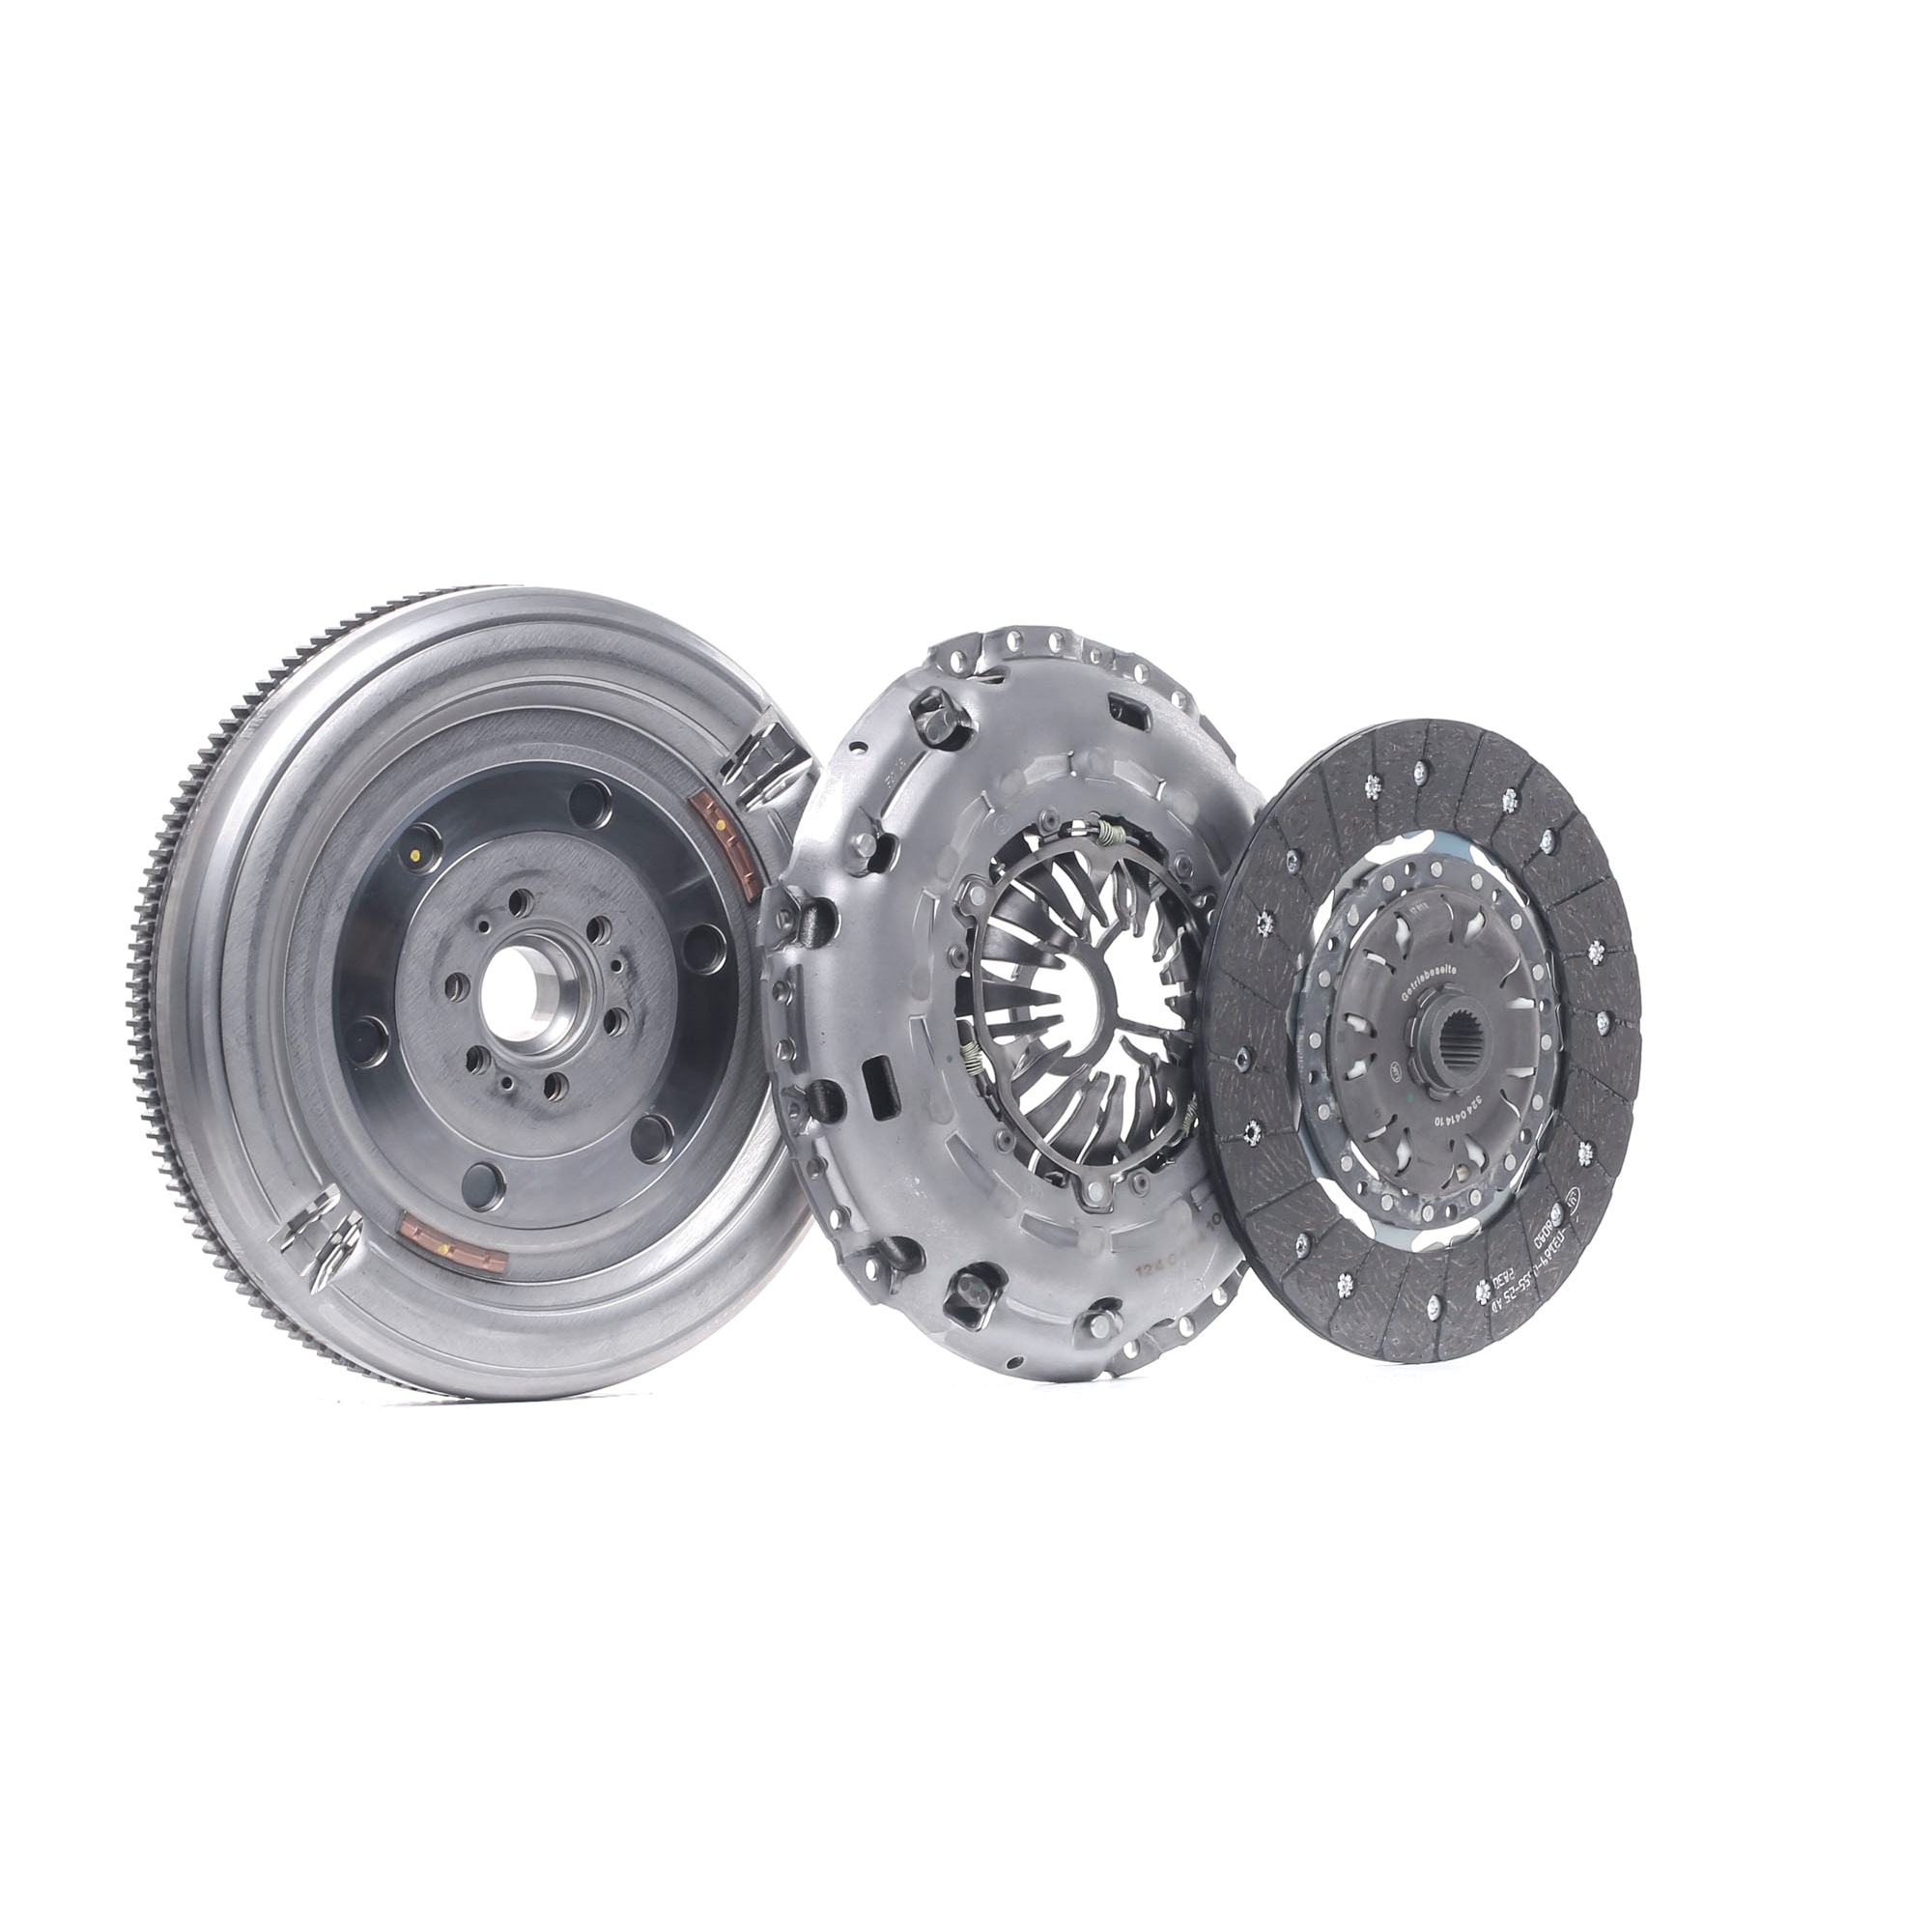 LuK BR 0241 600 0148 00 Clutch kit with central slave cylinder, without pilot bearing, with flywheel, with screw set, Requires special tools for mounting, Dual-mass flywheel with friction control plate, with automatic adjustment